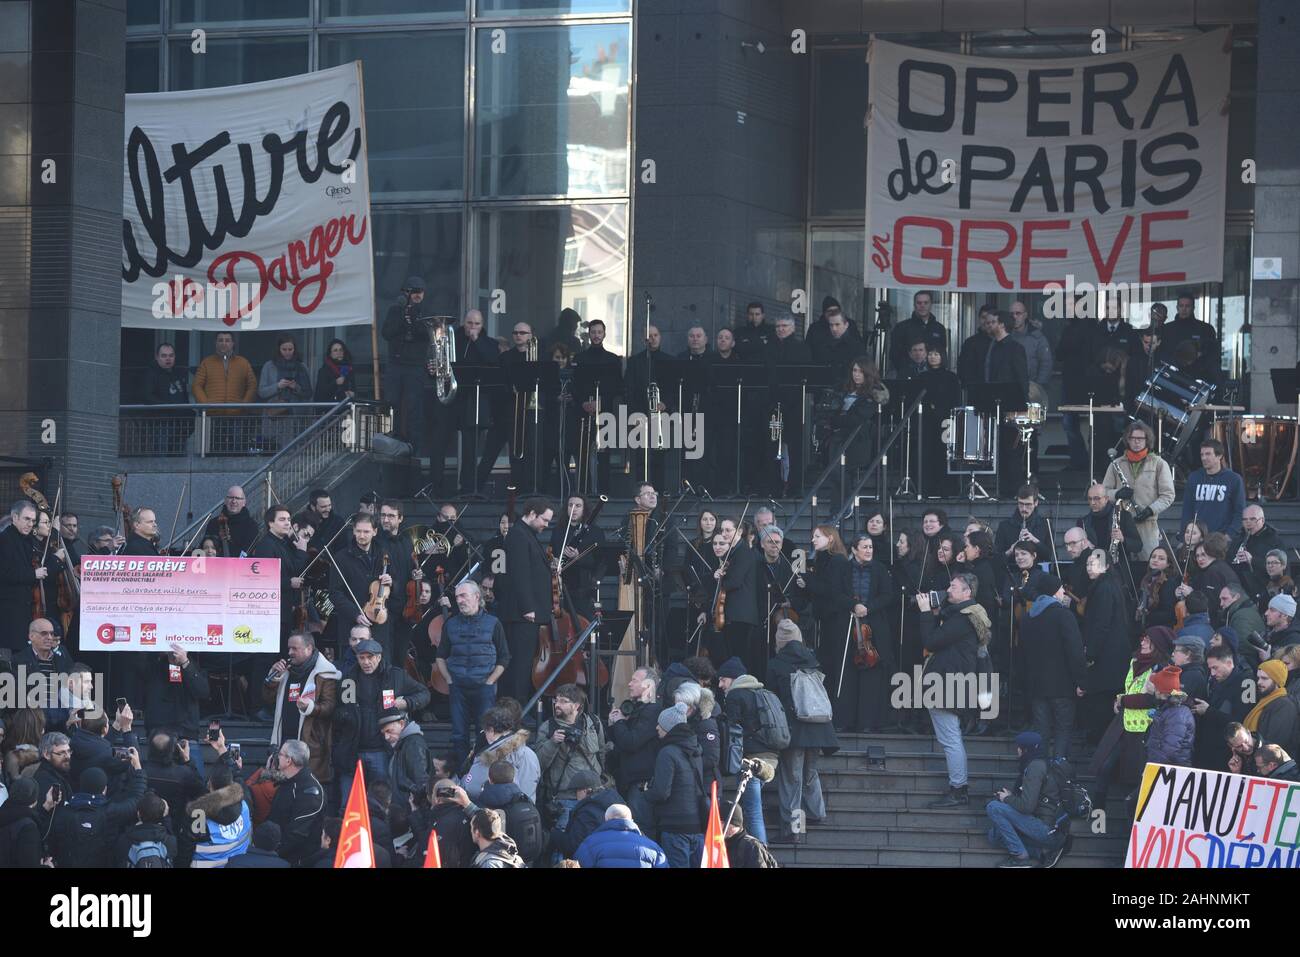 *** STRICTLY NO SALES TO FRENCH MEDIA OR PUBLISHERS *** December 31, 2019 - Paris, France: Protesters show a giant check of 40.000 euros that symbolises the amount of money that the Infocom CGT, a Union branch, will give to Opera workers on strike. Musicians from the Opera Bastille gave a free open-air concert on the steps of the opera house to protest against the French government's pension reform plan. Stock Photo